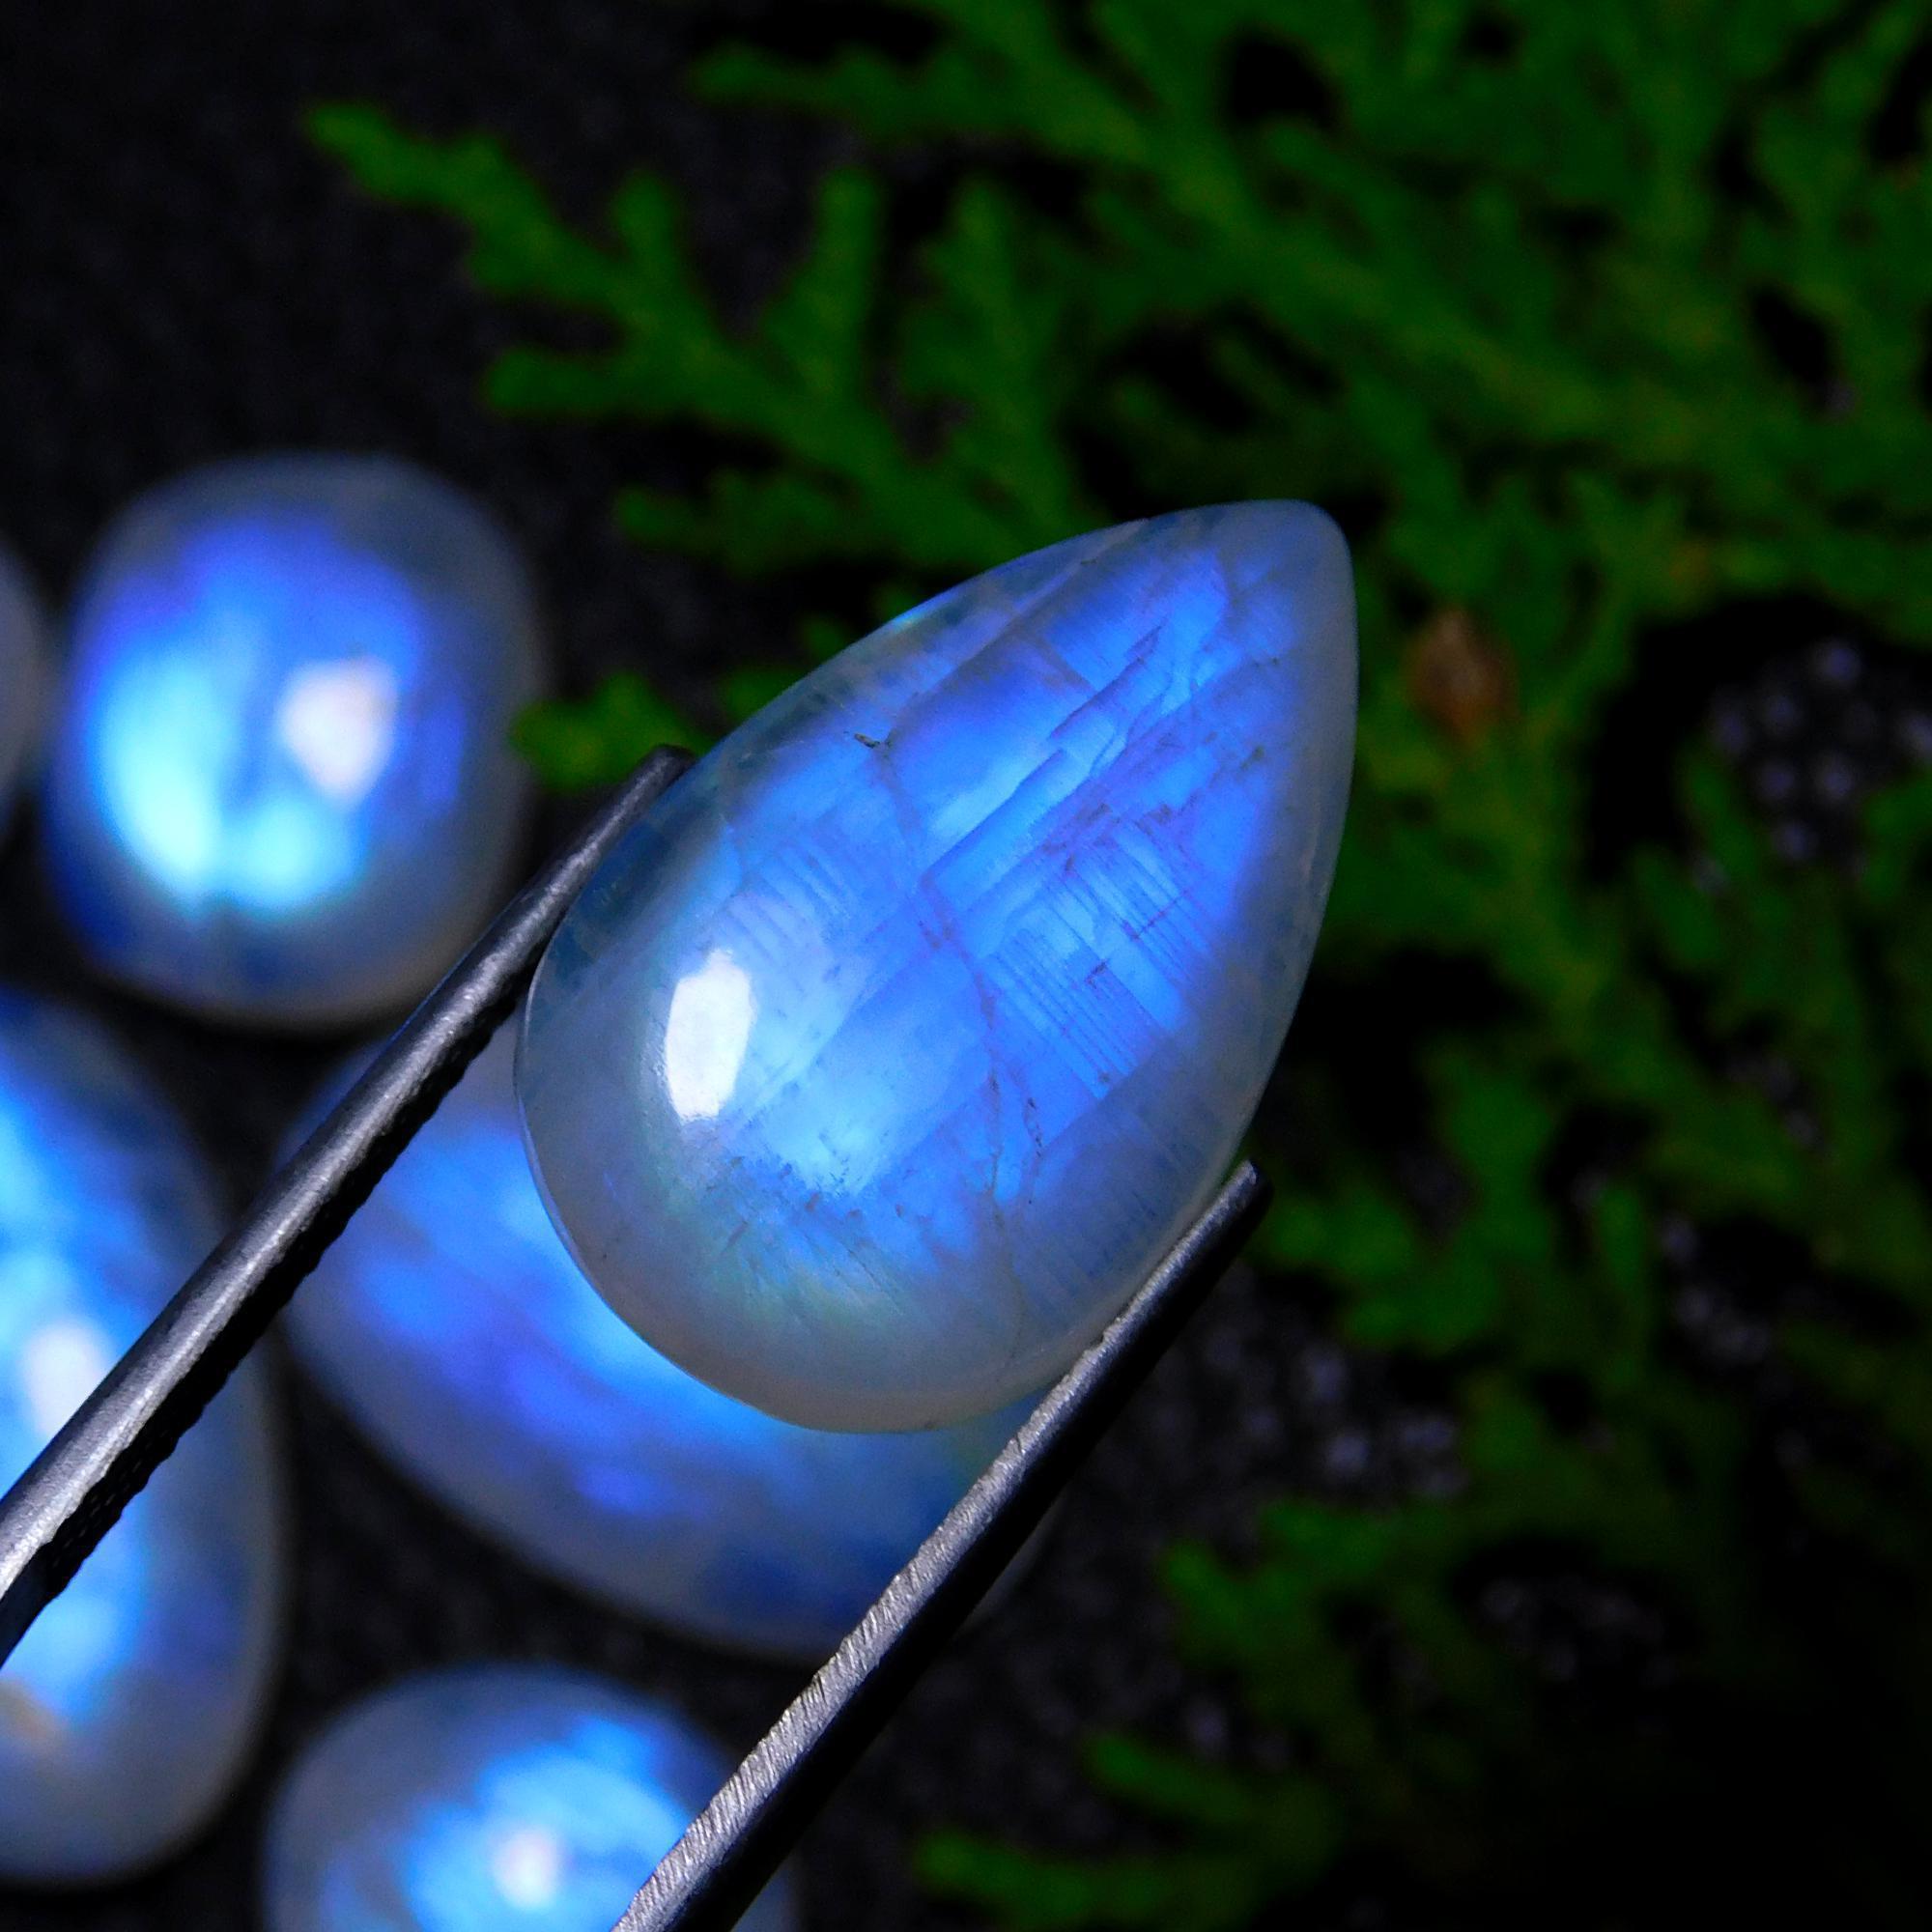 8Pcs 80Cts Natural Rainbow Moonstone Cabochon Blue Fire Loose Gemstone Crystal jewelry supplies wholesale lot gift for her Black Friday 24X12 12X12mm#9425